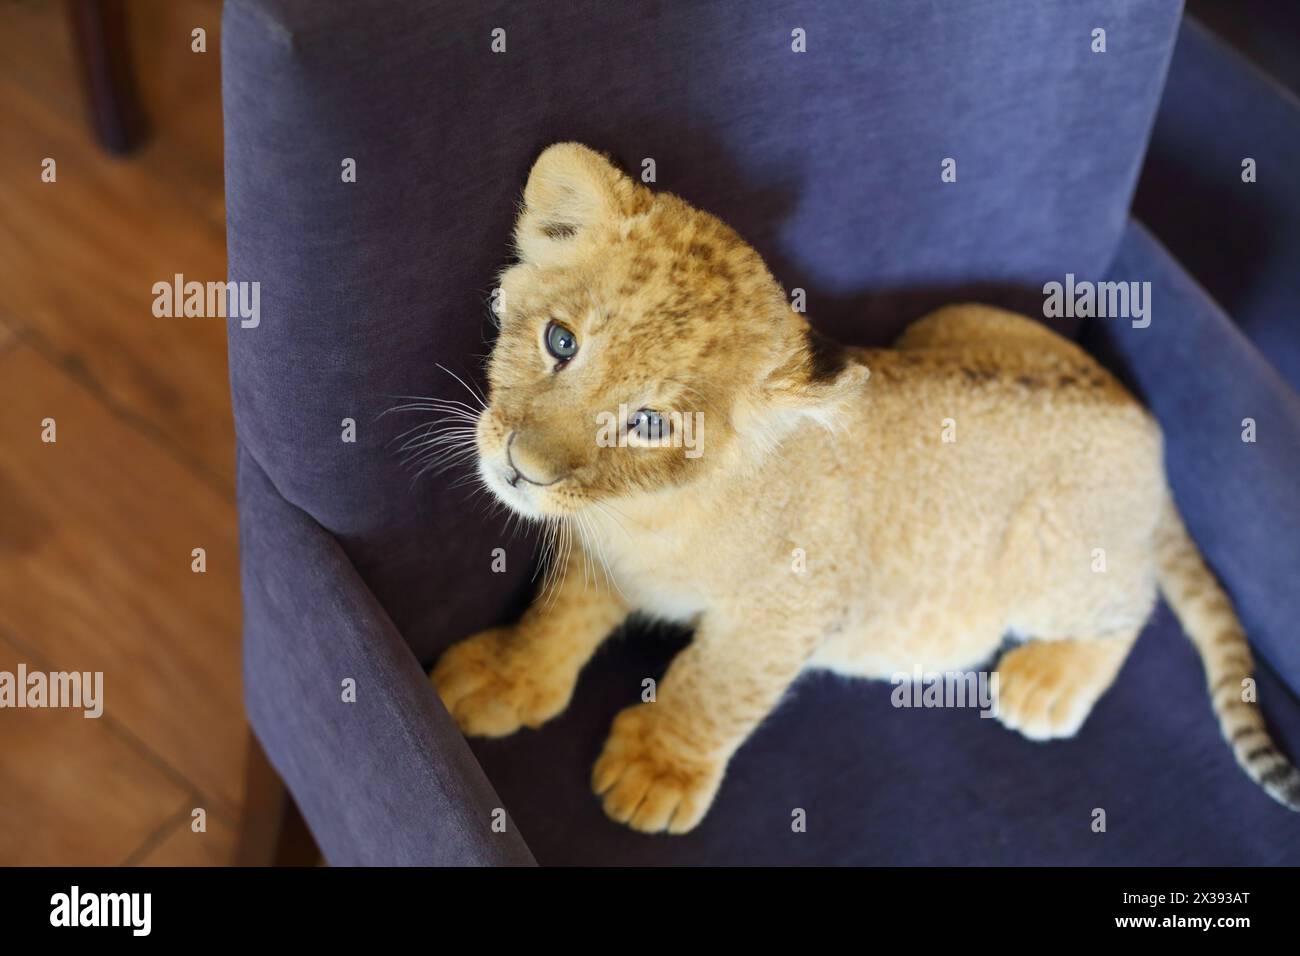 Lion calf looks up and stands on soft armchair indoor, top view Stock Photo